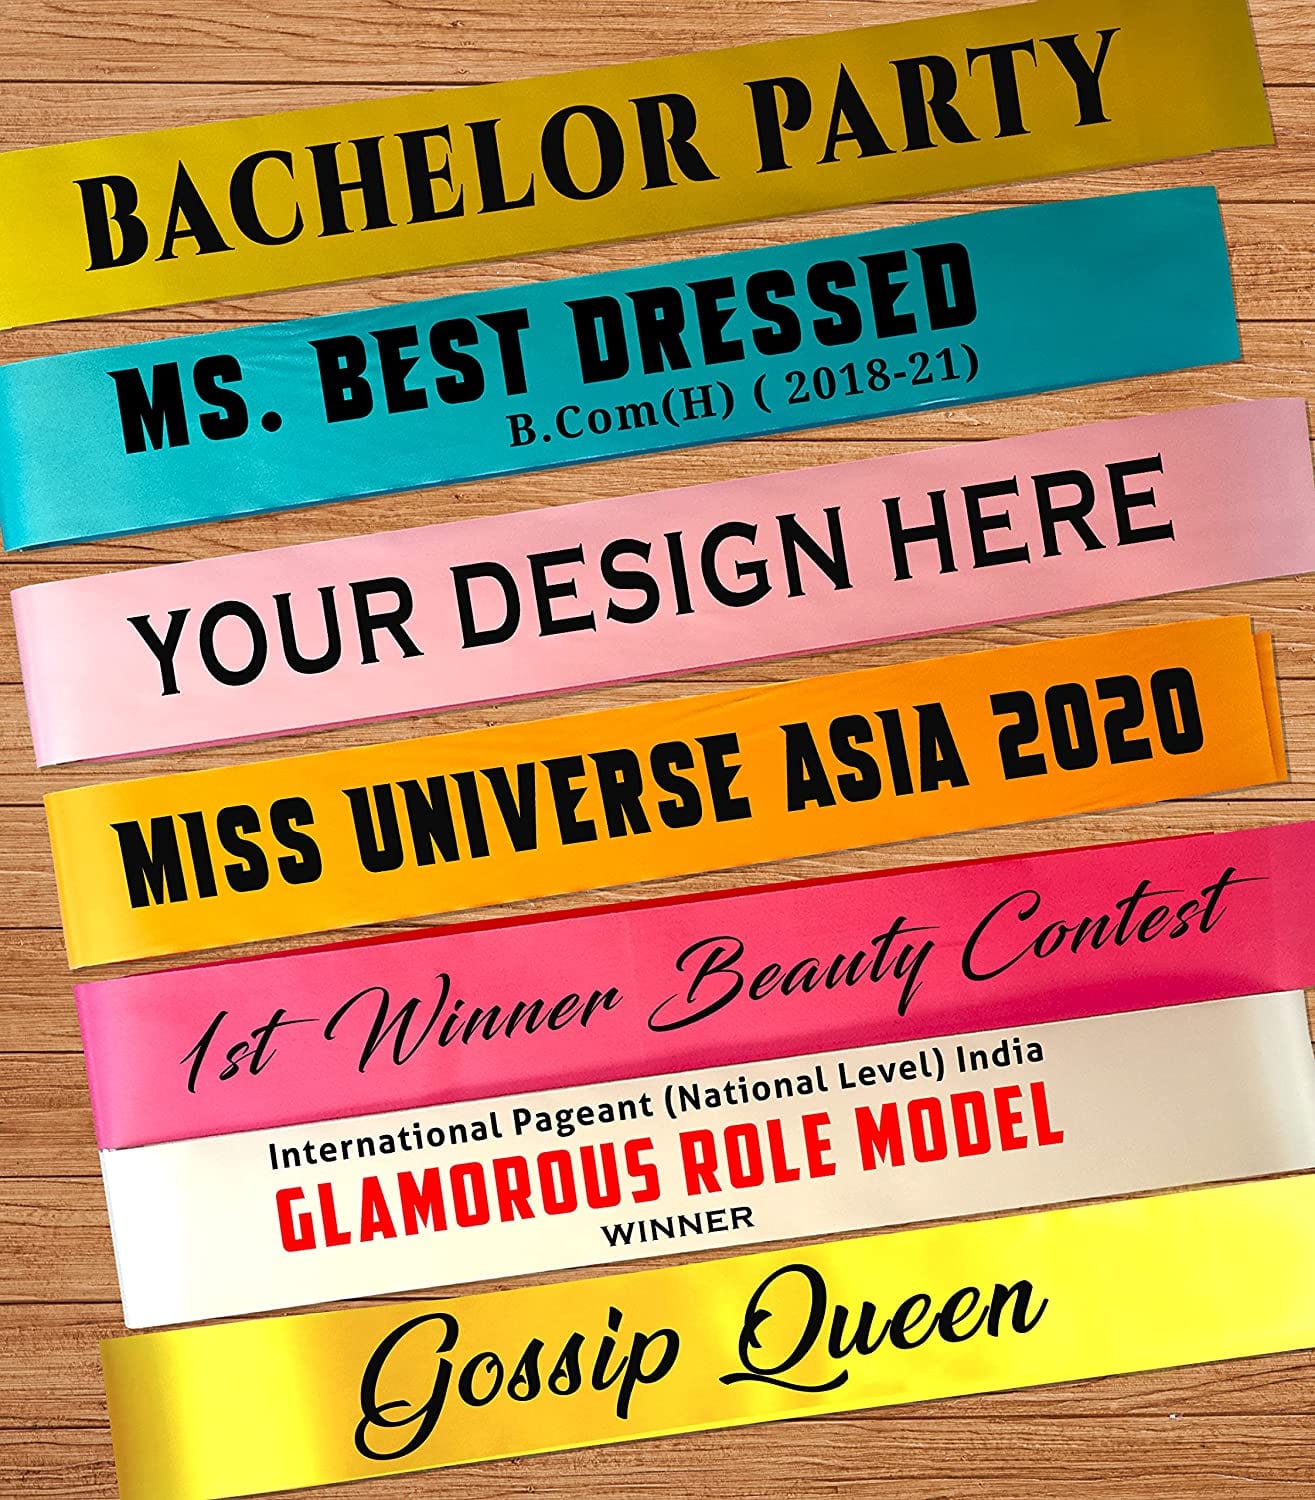 LAMANSH ® personalized sash stoles 4 inch width Personalized Customizable Sash for Fashion Shows, Corporate Functions, College Freshers Party, Bachelor Party, Fun Games, Wedding Functions